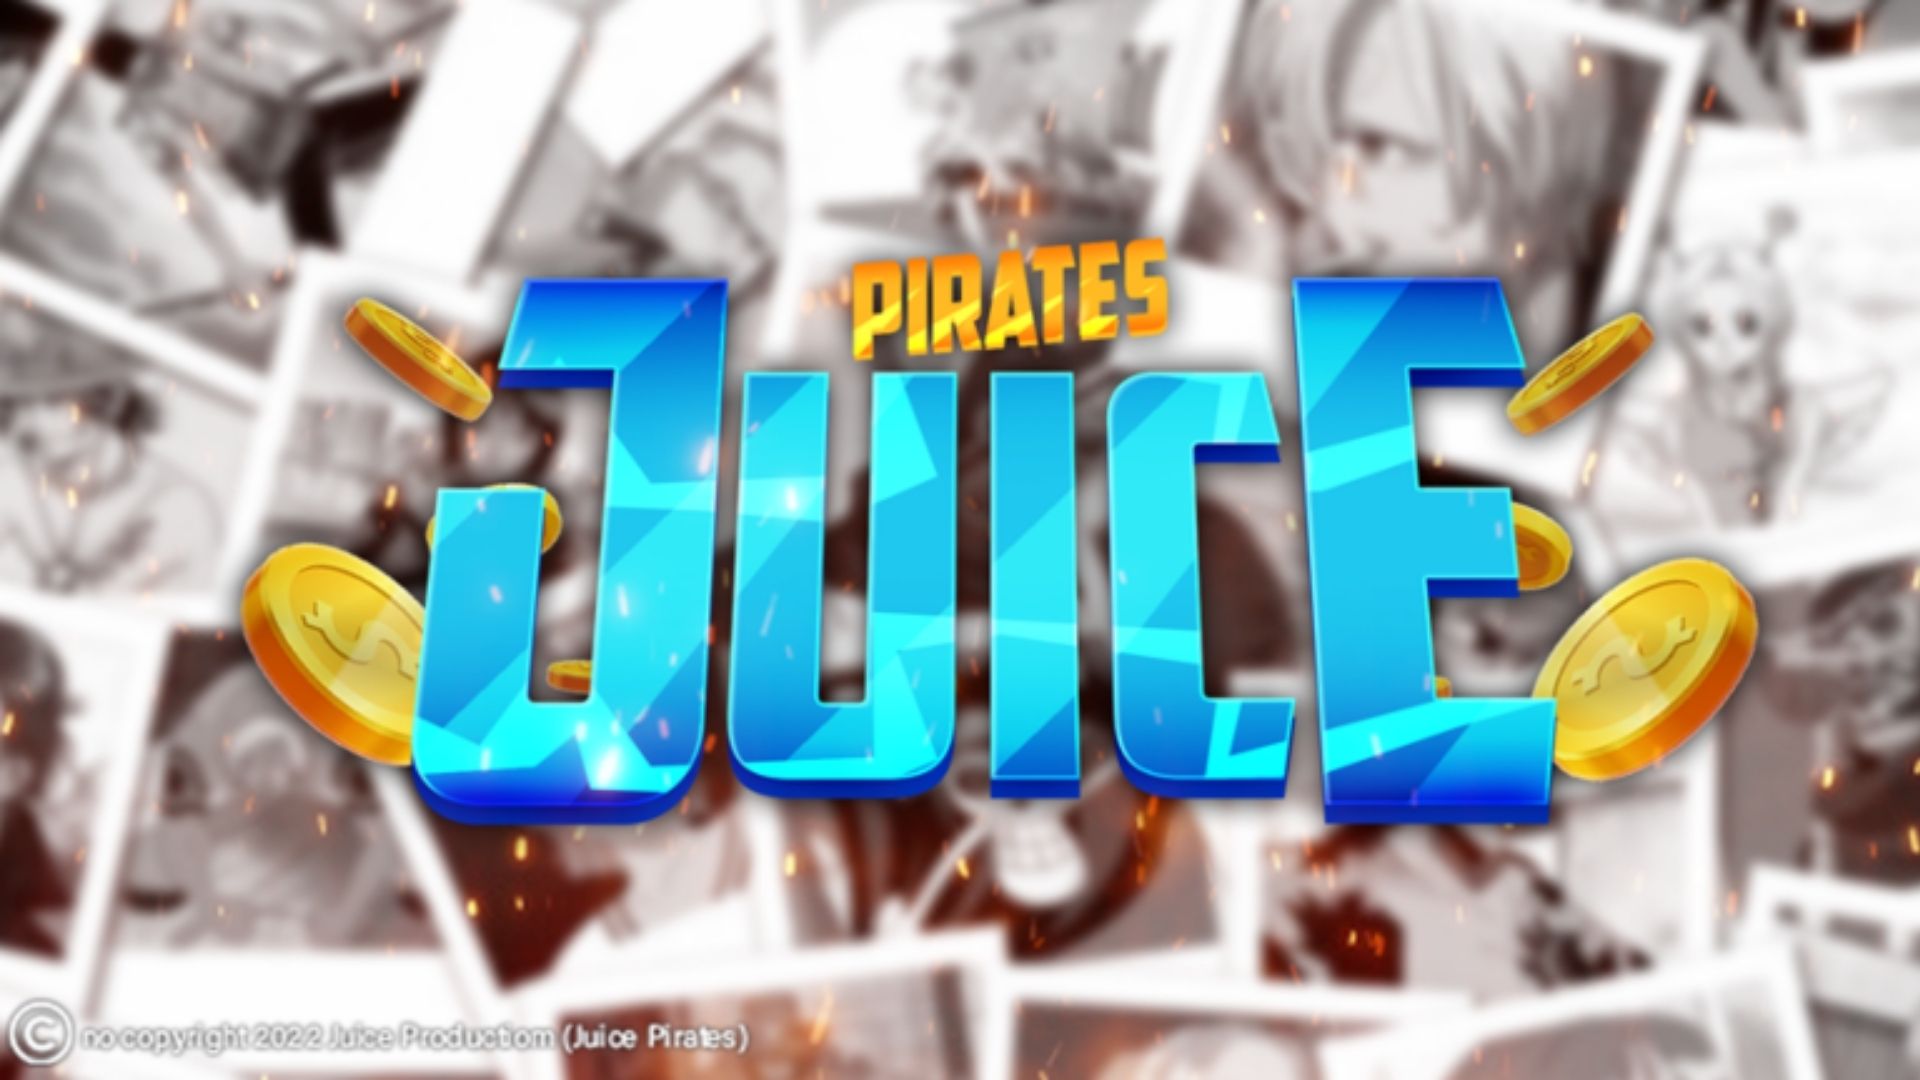 Juice Pirates codes - Free cash and gems (August 2023)